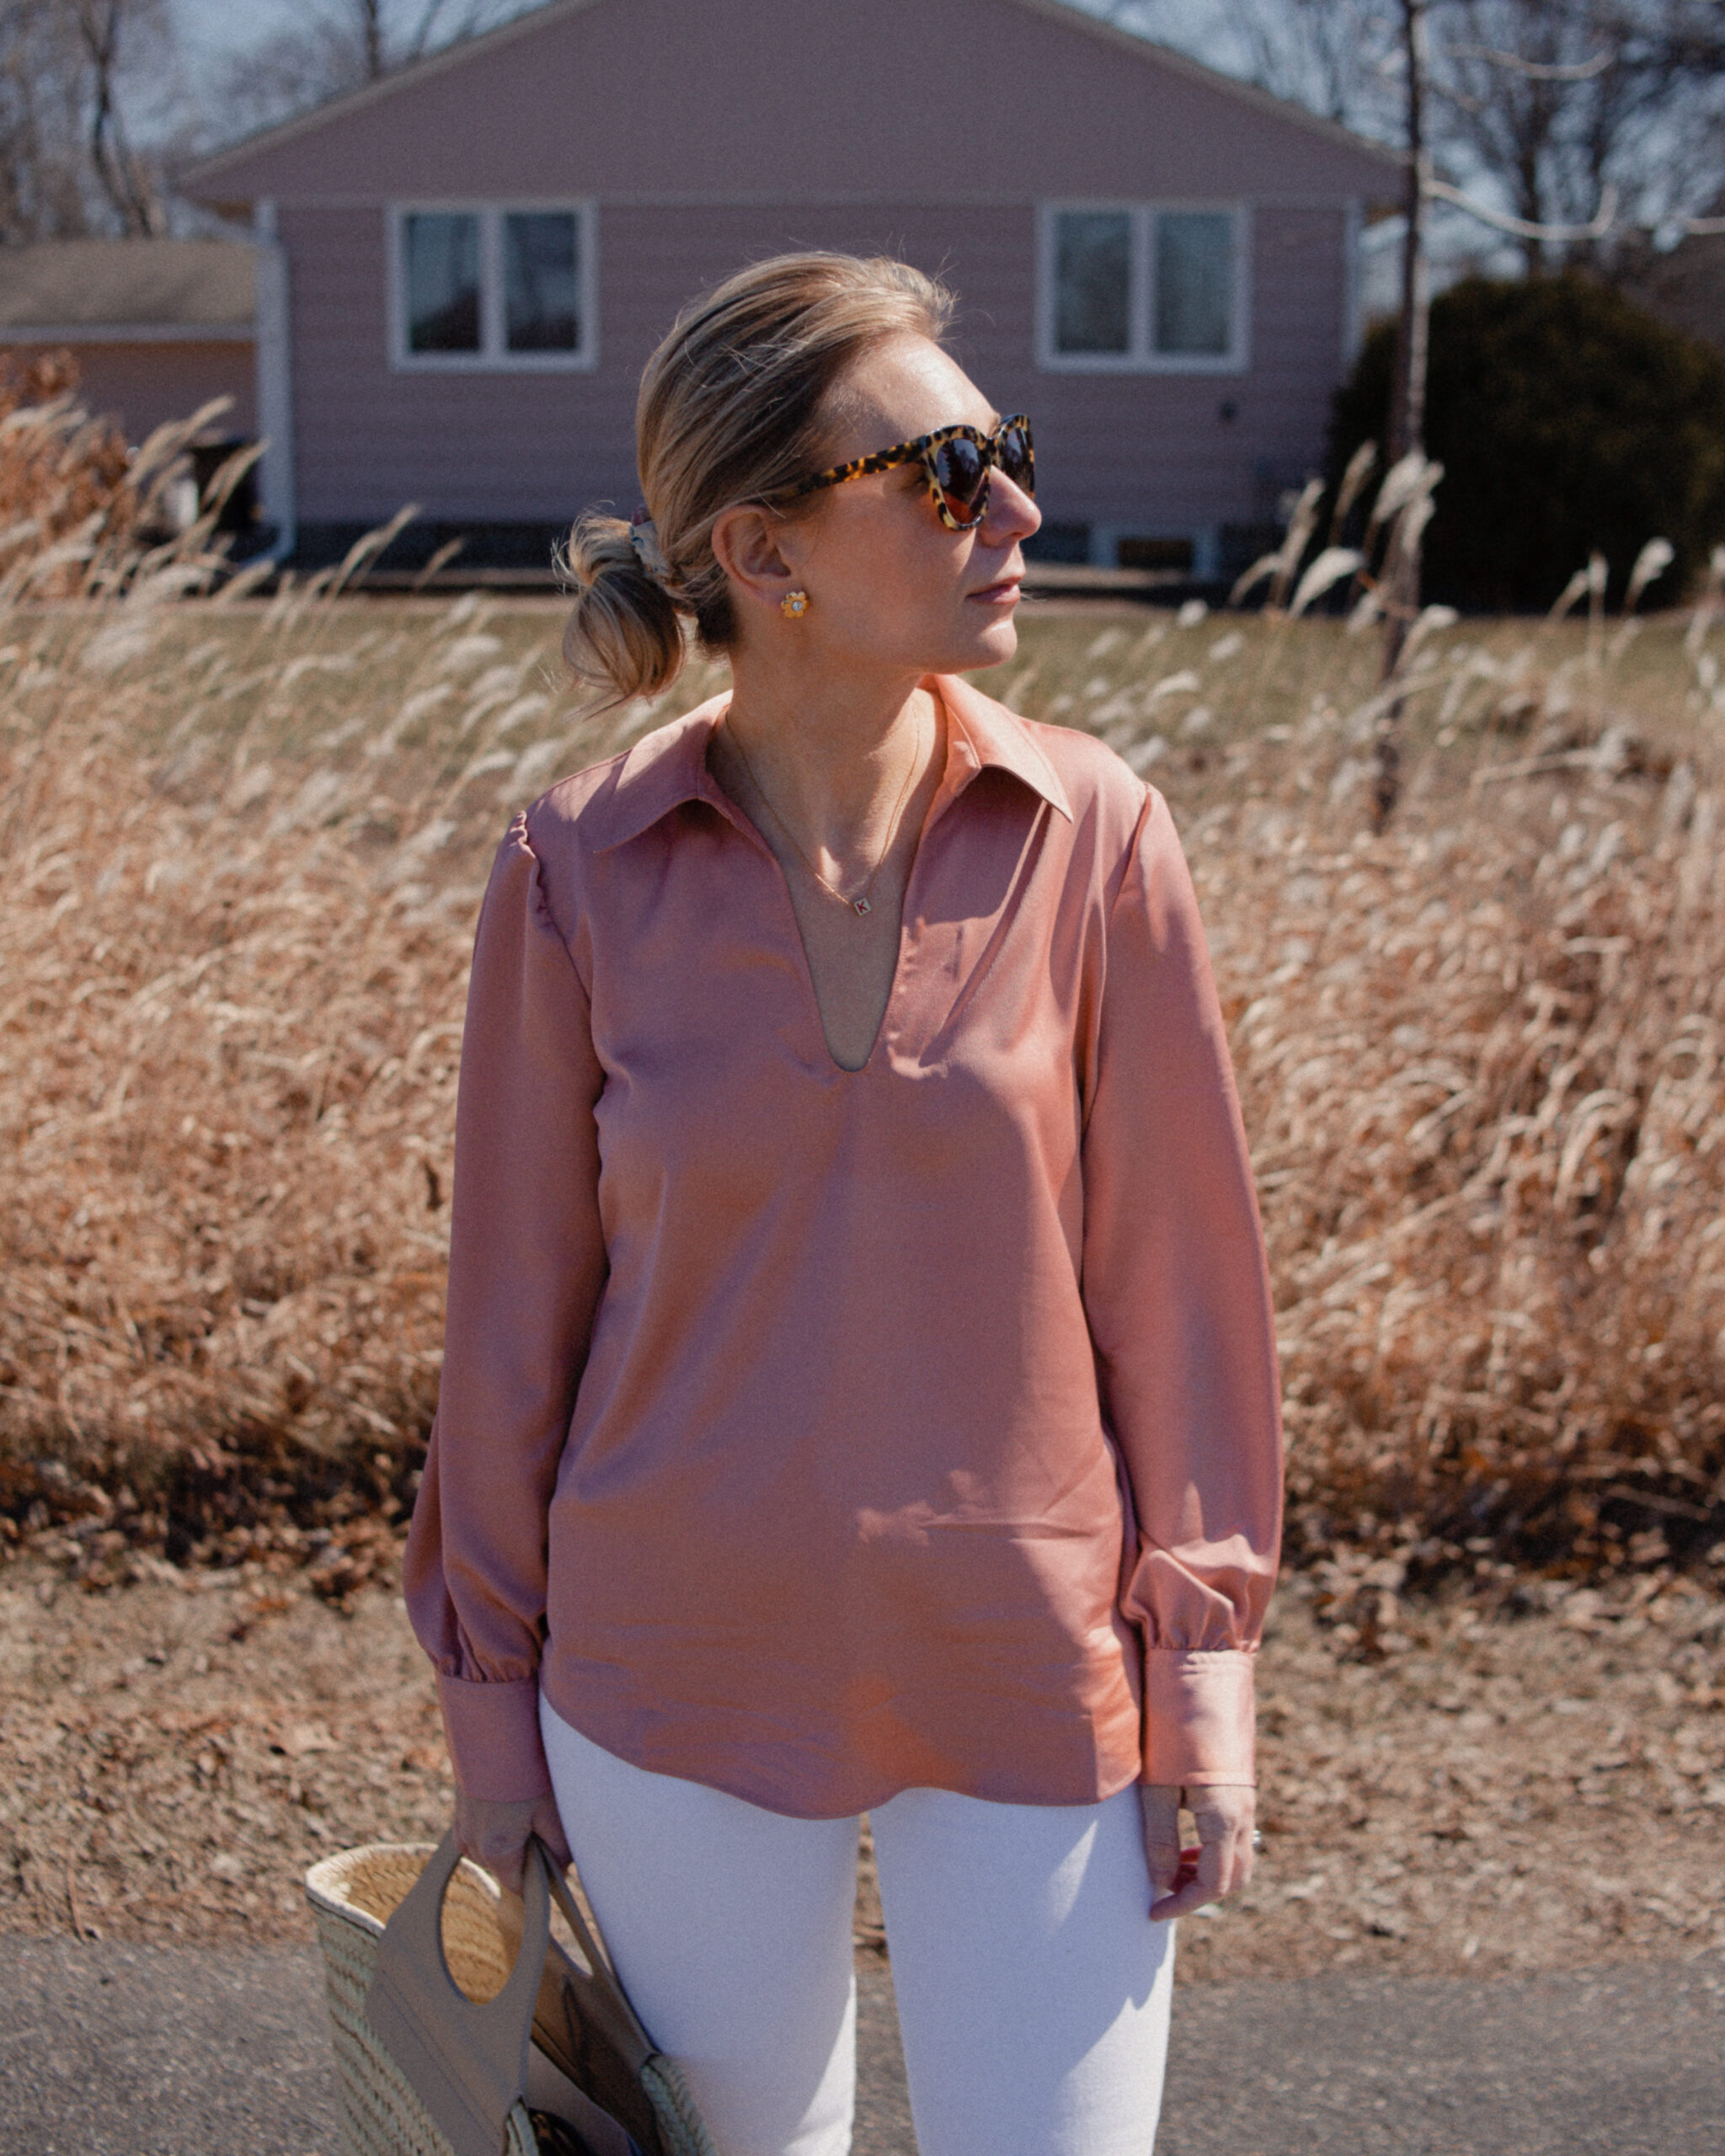 Karin Emily wears a pink satin blouse over white jeans